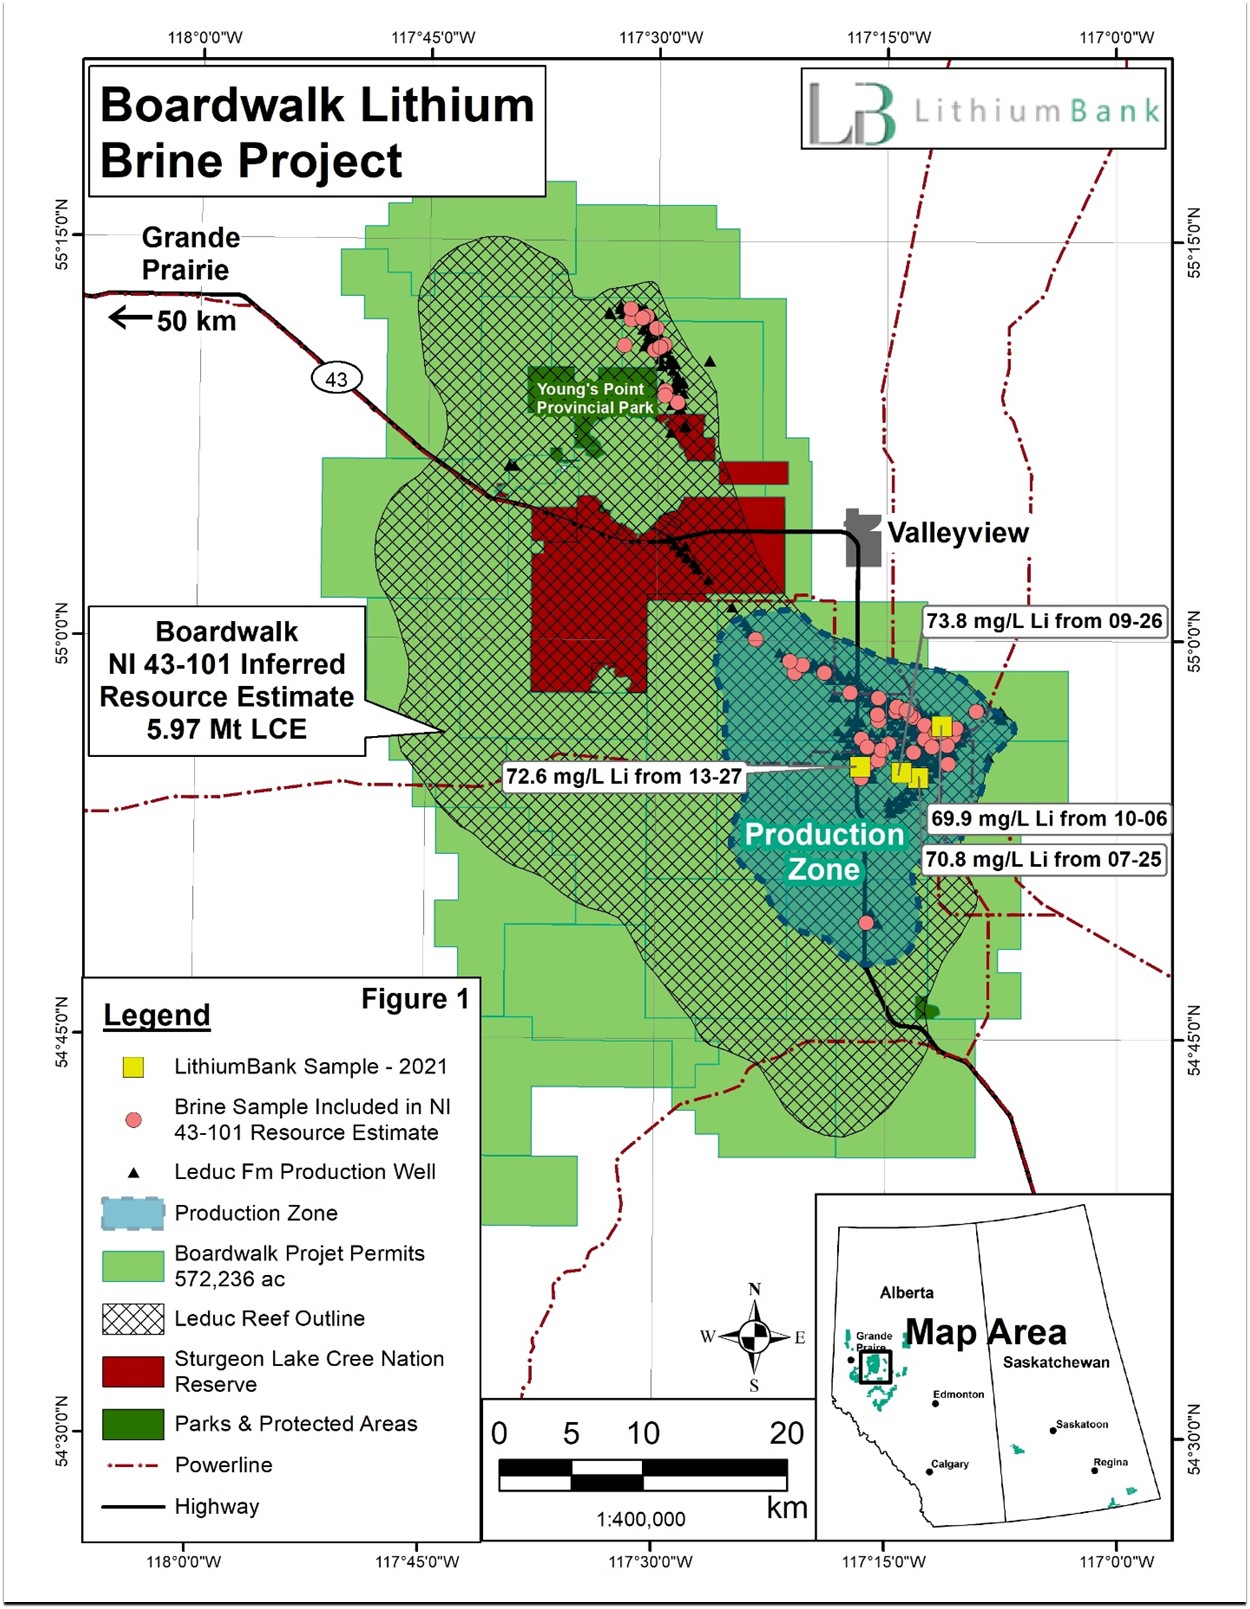 Figure 1. Boardwalk Lithium Brine Project mineral title map highlighting the "Production Zone"